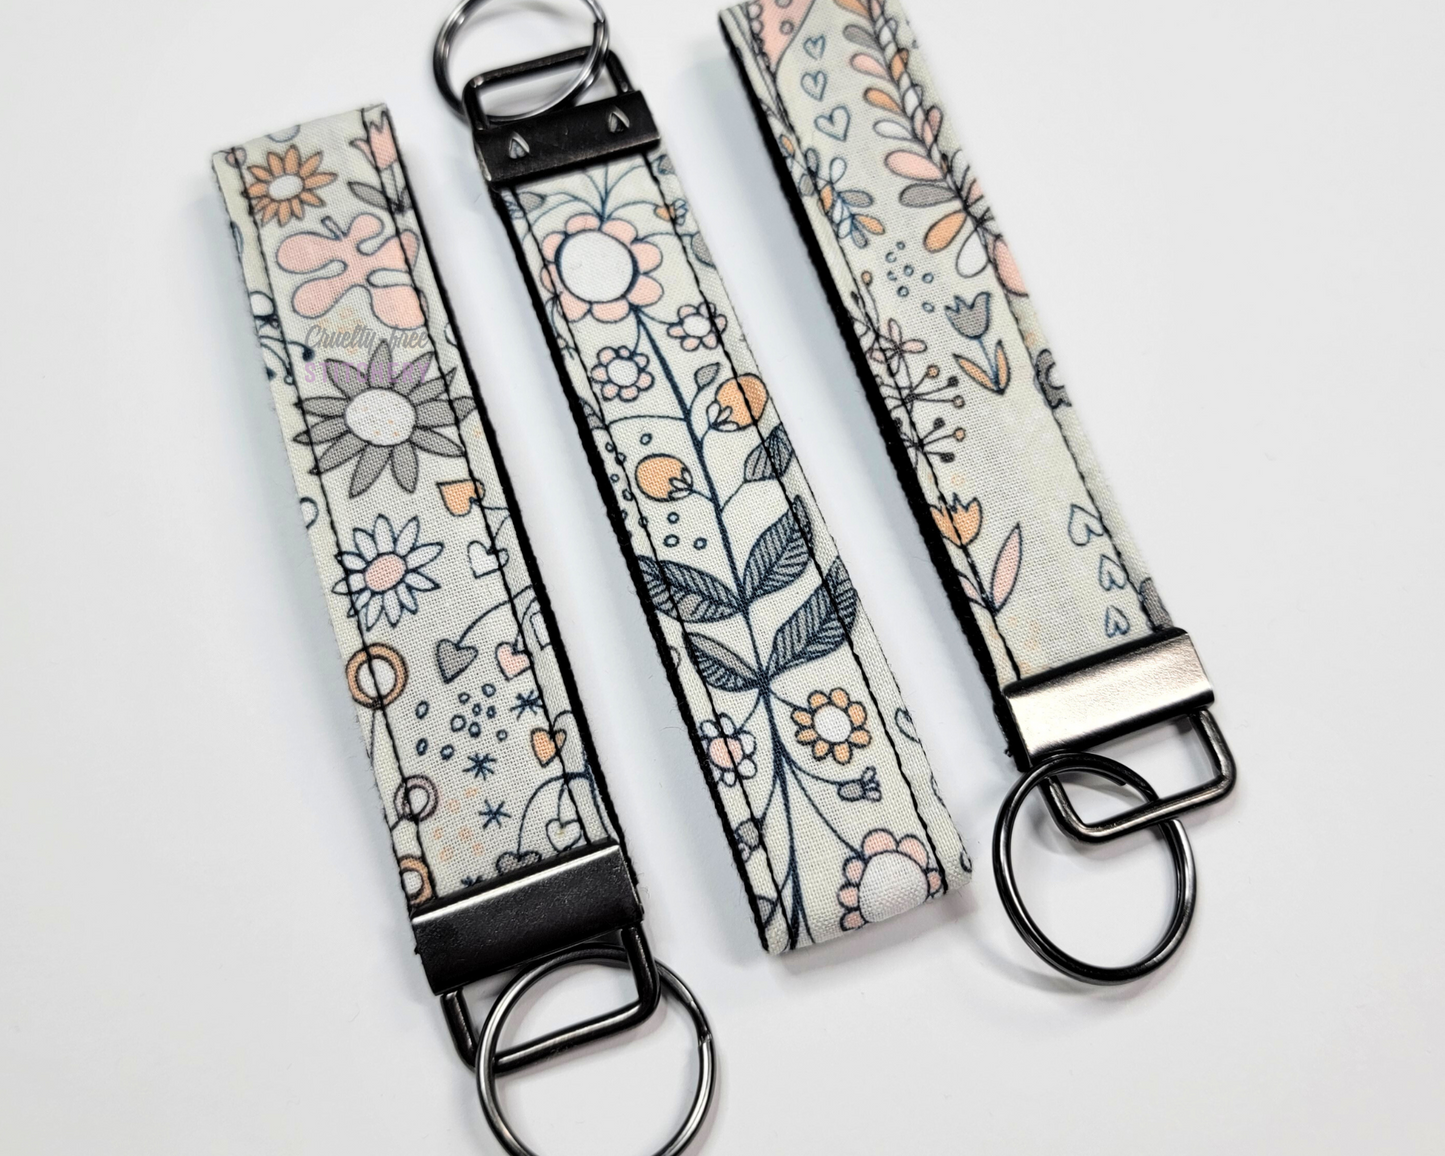 Wristlet key fobs arranged in a row of three with ends alternating. The wristlet is a light grey fabric with whimsical doodled pink and dark grey flowers. The hardware and key ring are gunmetal silver.